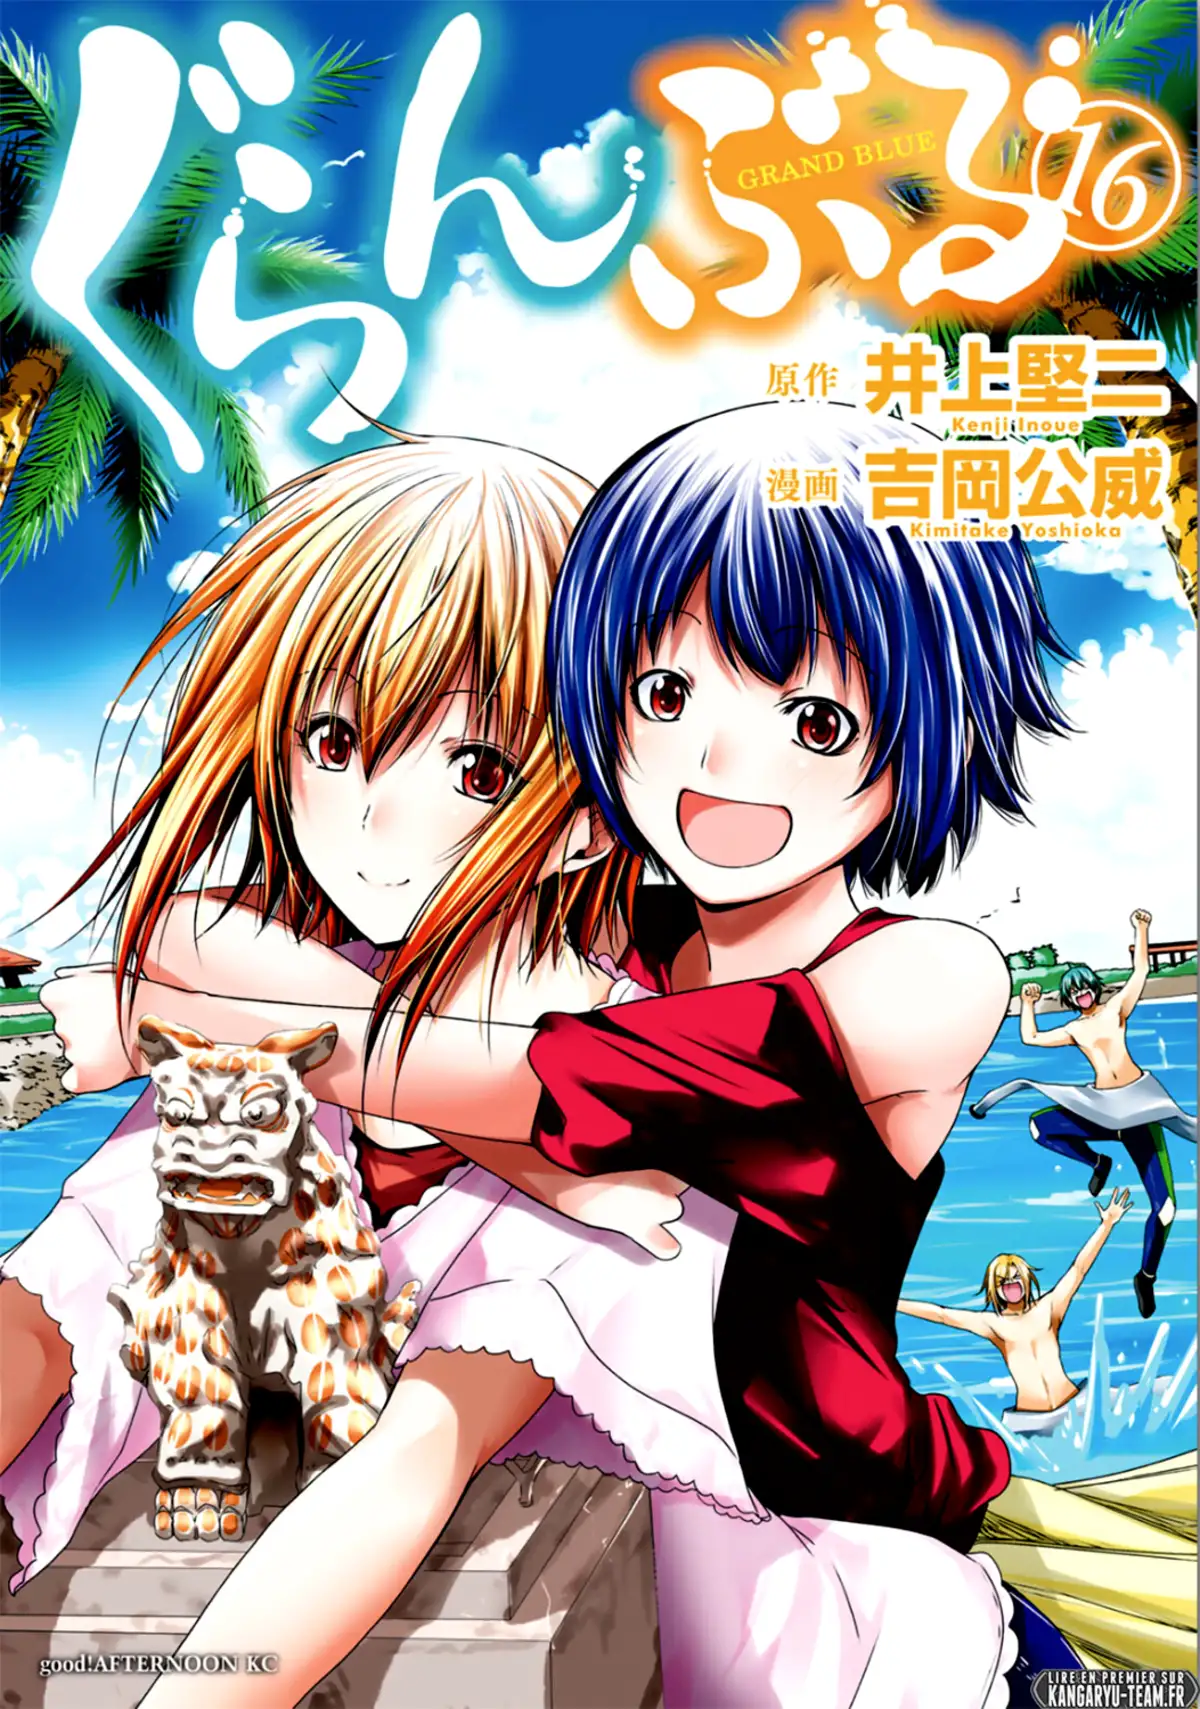 Grand Blue Volume 16 page 1